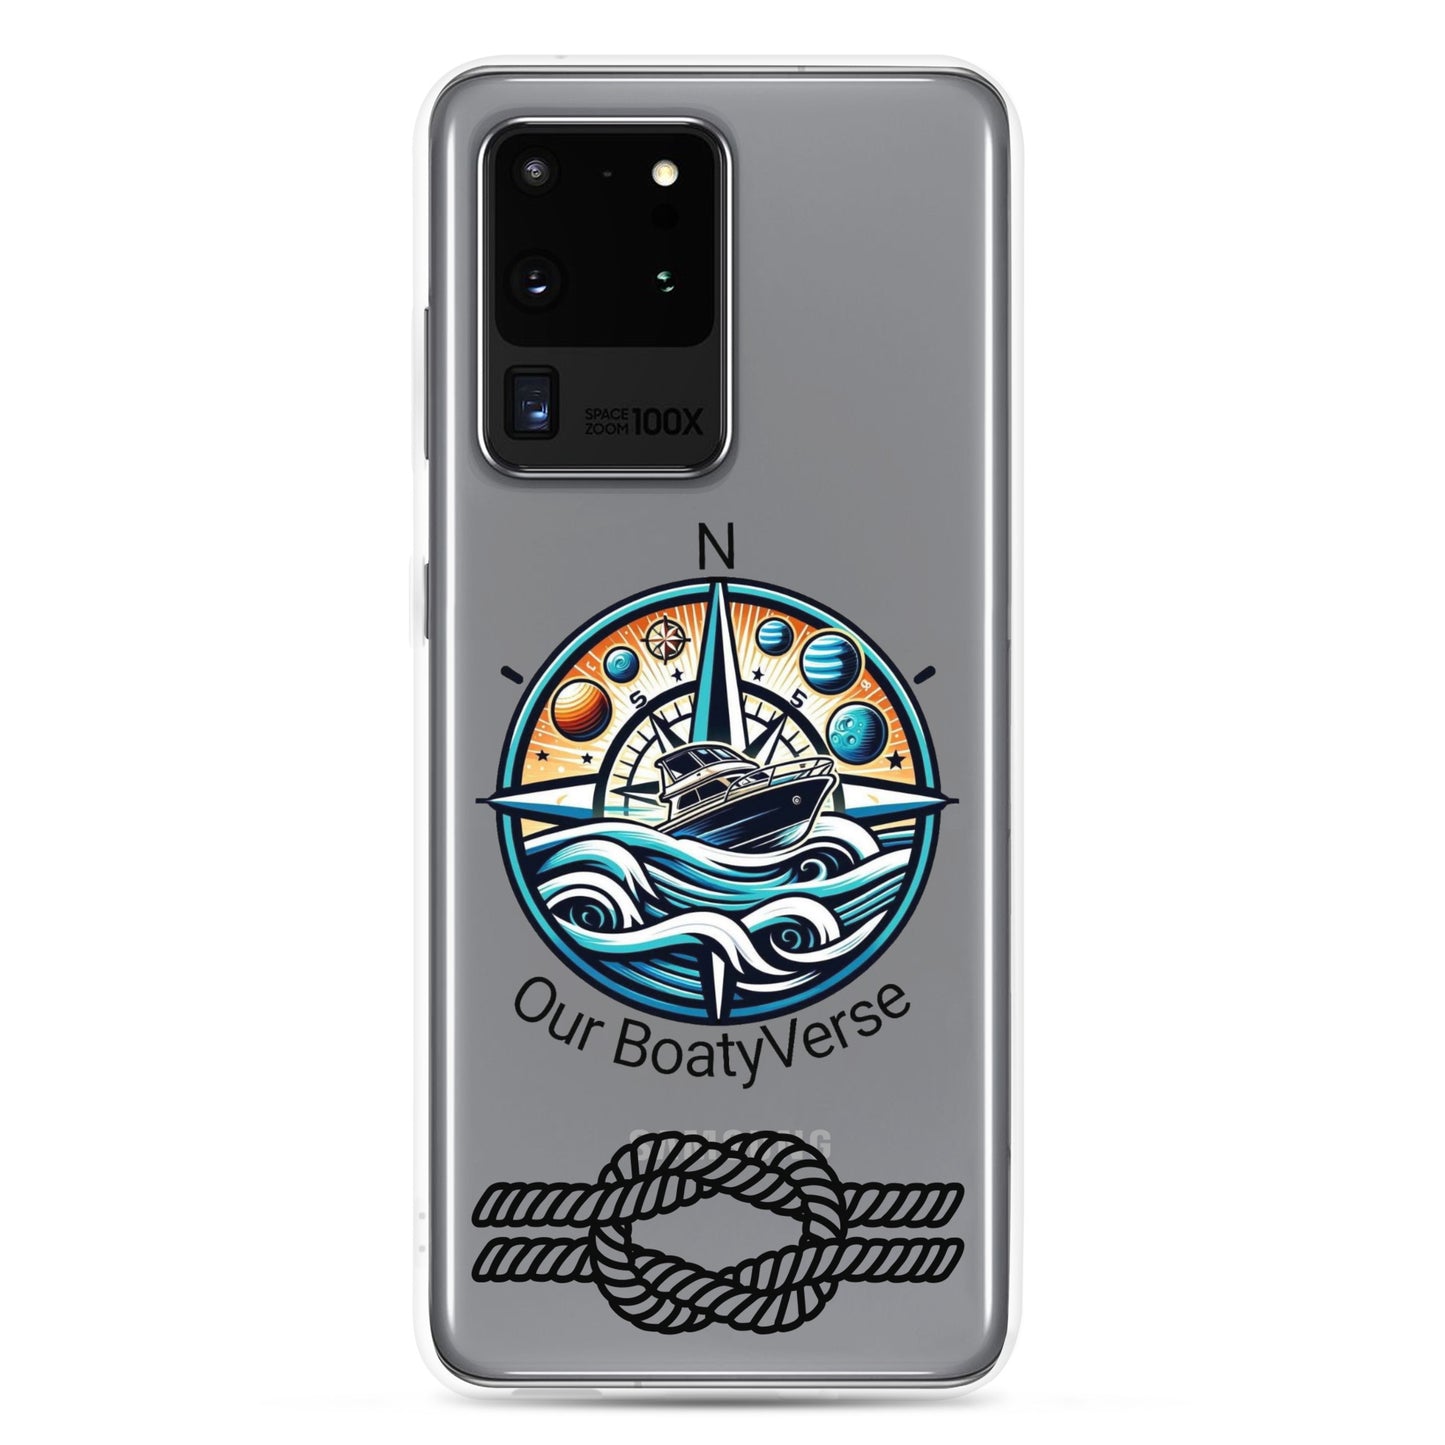 Stylish Clear Case for latest Samsung® phones by Our BoatyVerse